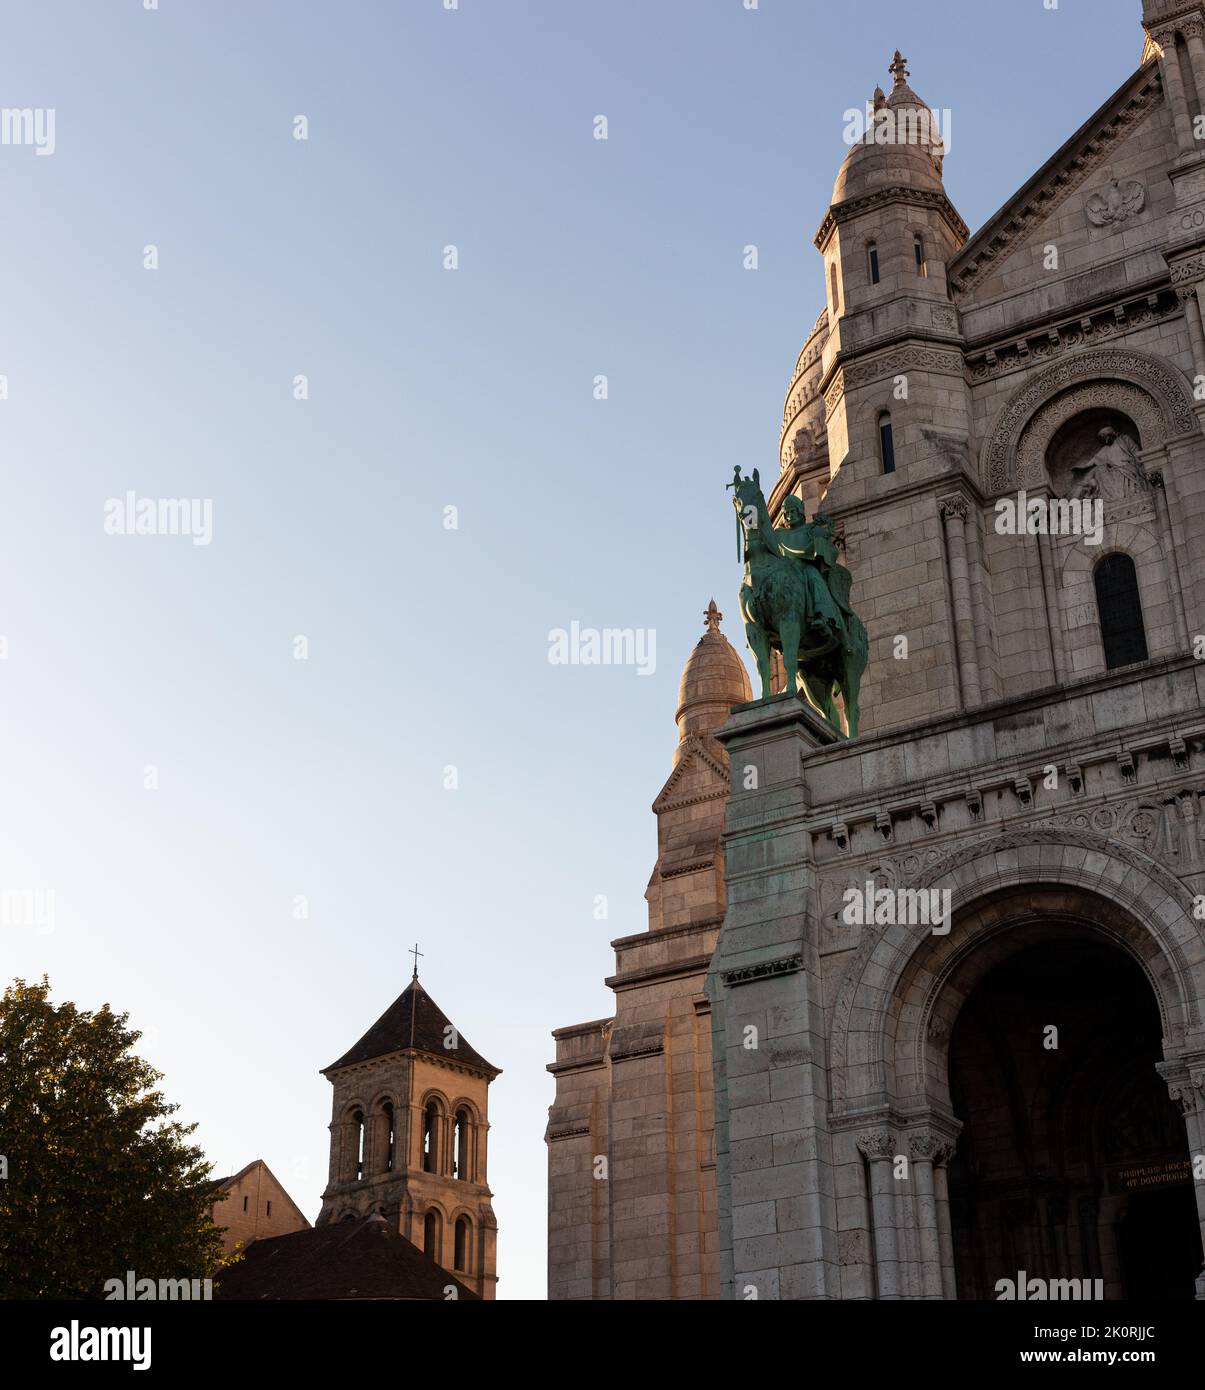 Sacre Coeur basilica, 'Basilica of the Sacred Heart of Jesus' with the Jeanne d'Arc statue in front of the main entrance. Paris, Montmartre, France. Stock Photo